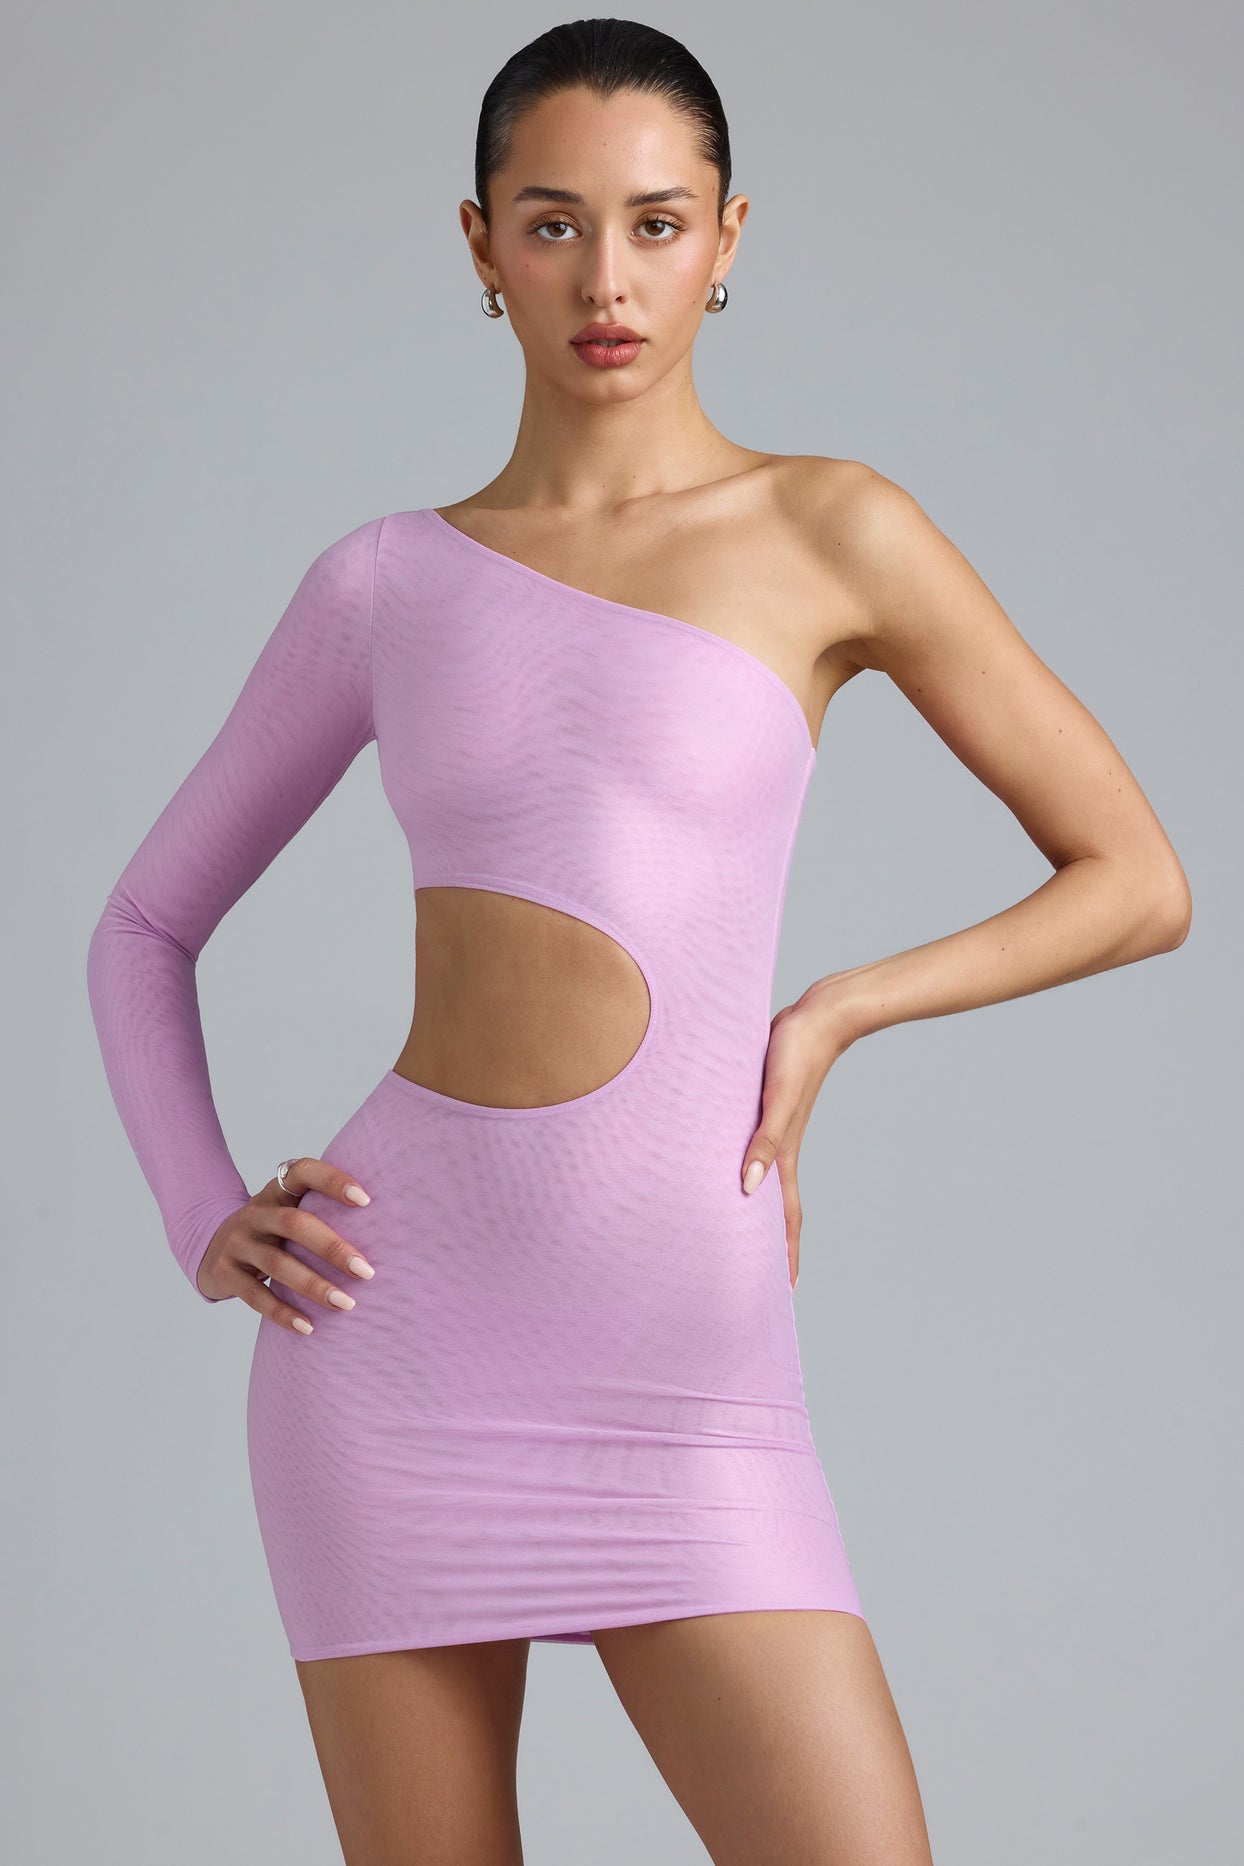 Metallic Cut-Out One-Shoulder Mini Dress in Violet Pink